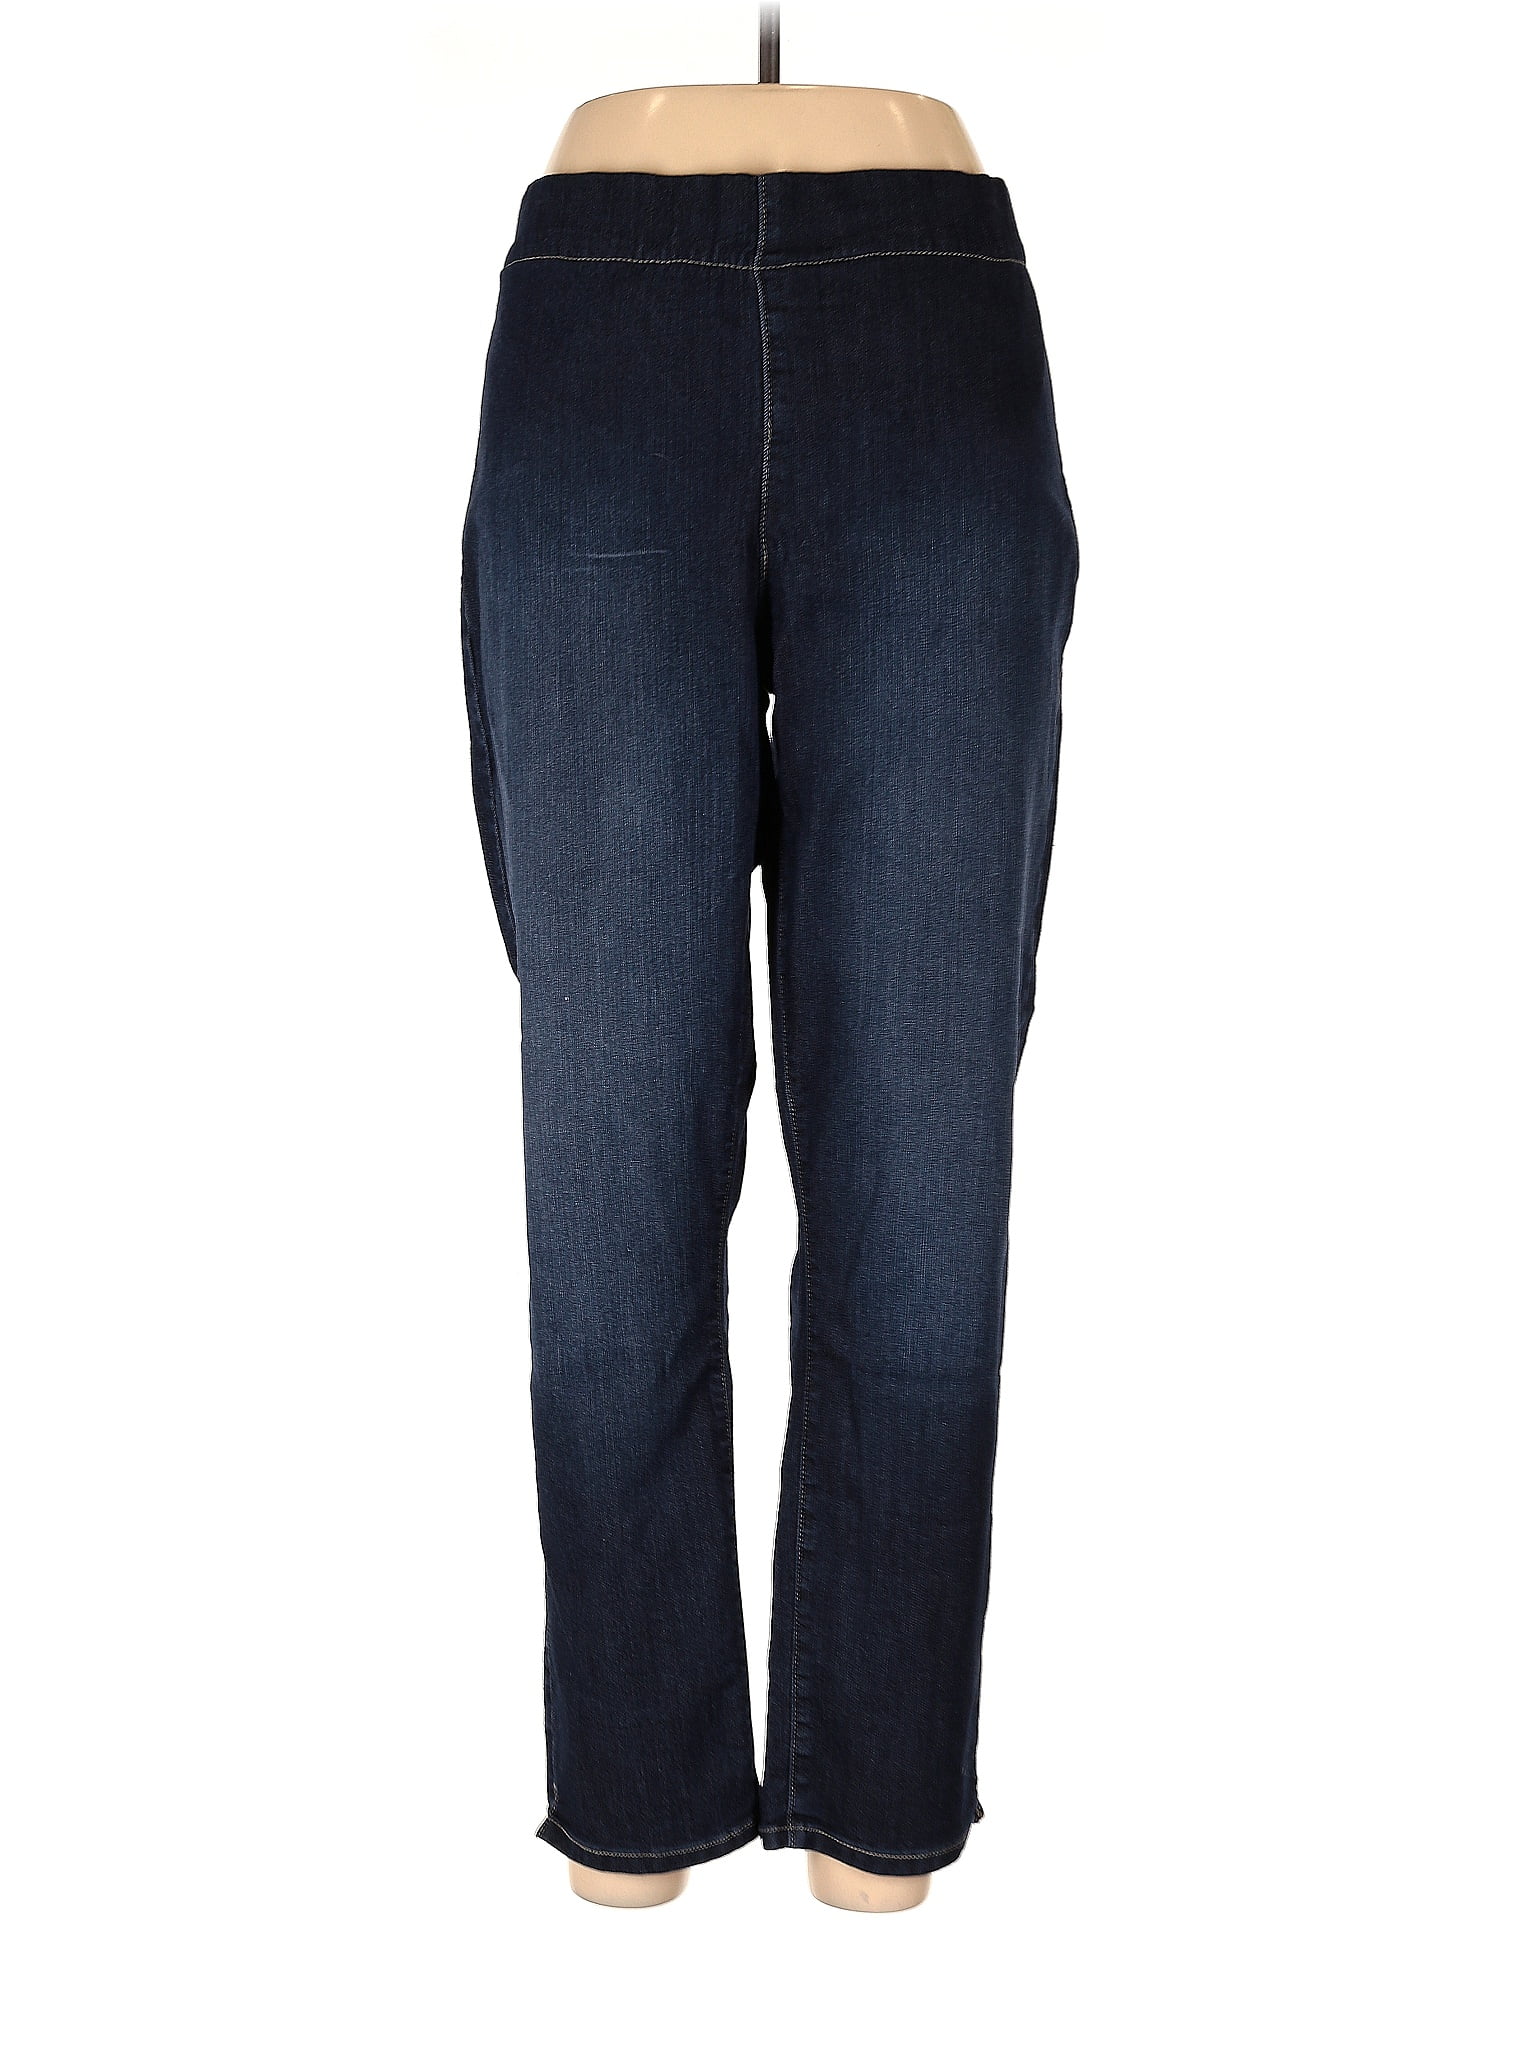 So Slimming by Chico's Solid Blue Jeans Size Lg (2) - 73% off